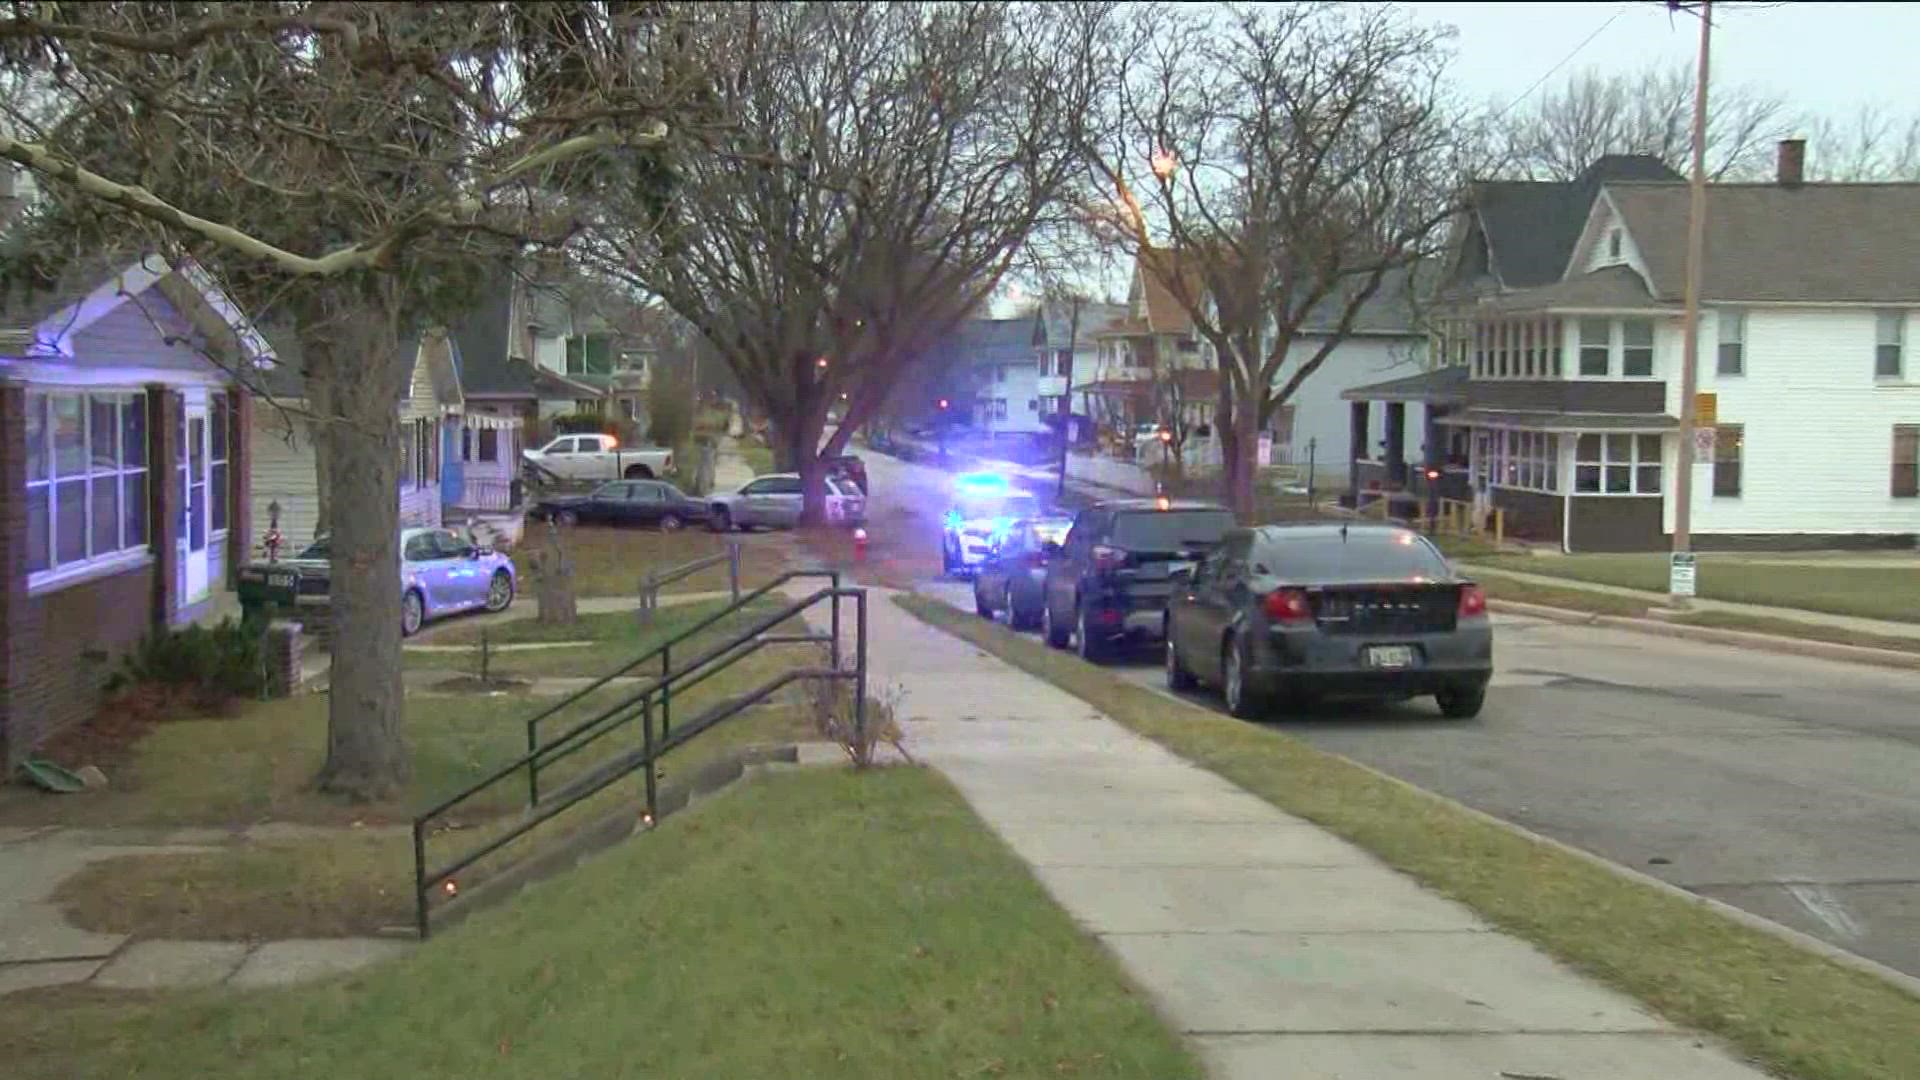 Toledo police say an adult man was shot in the 800 block of Lincoln Avenue. His injuries are not life-threatening.